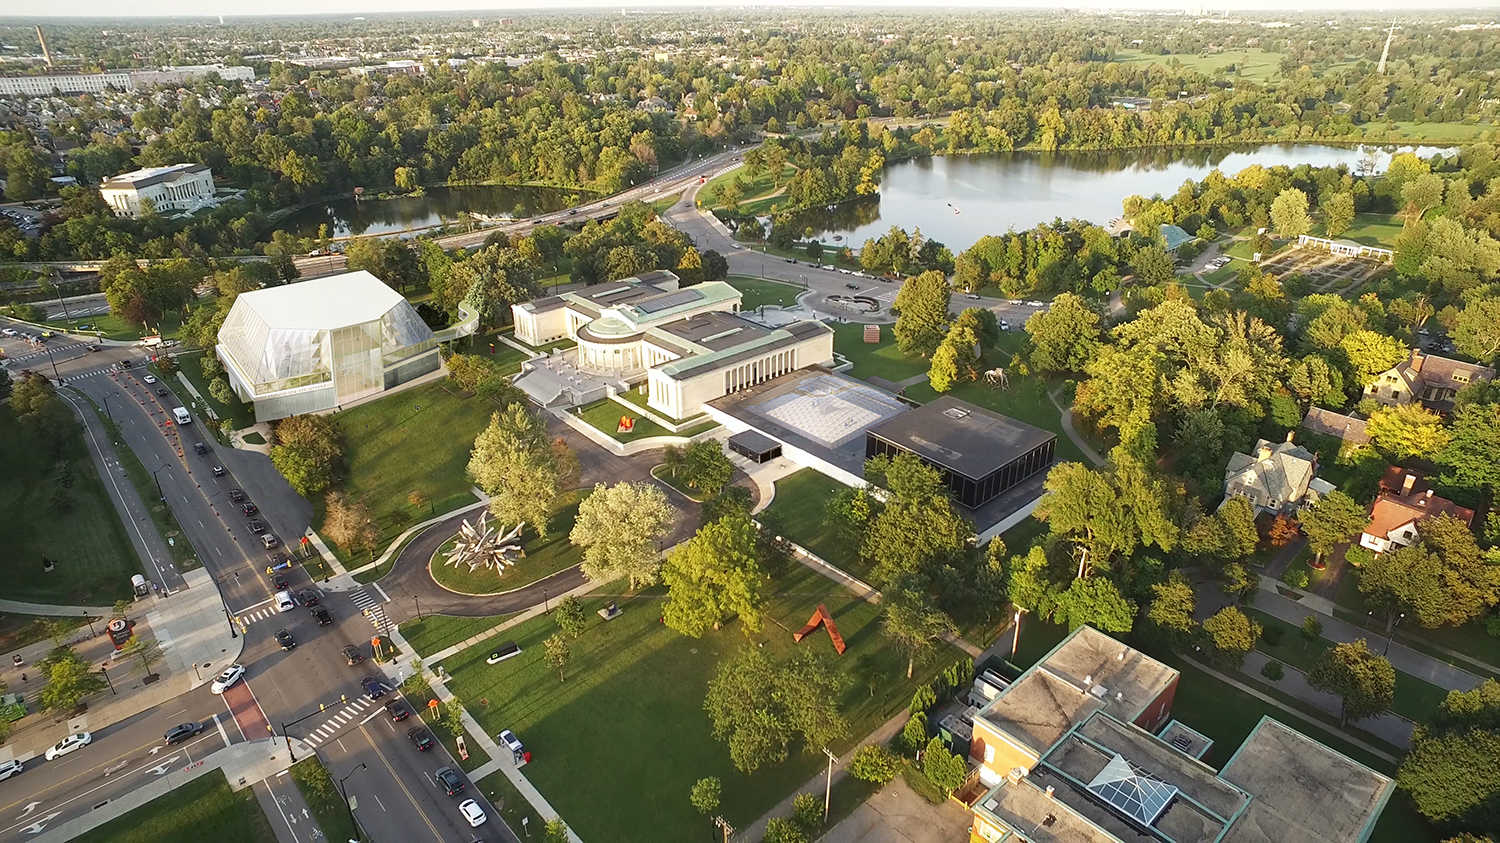 An aerial photograph of the museum's campus with a rendering of the new building in the top left